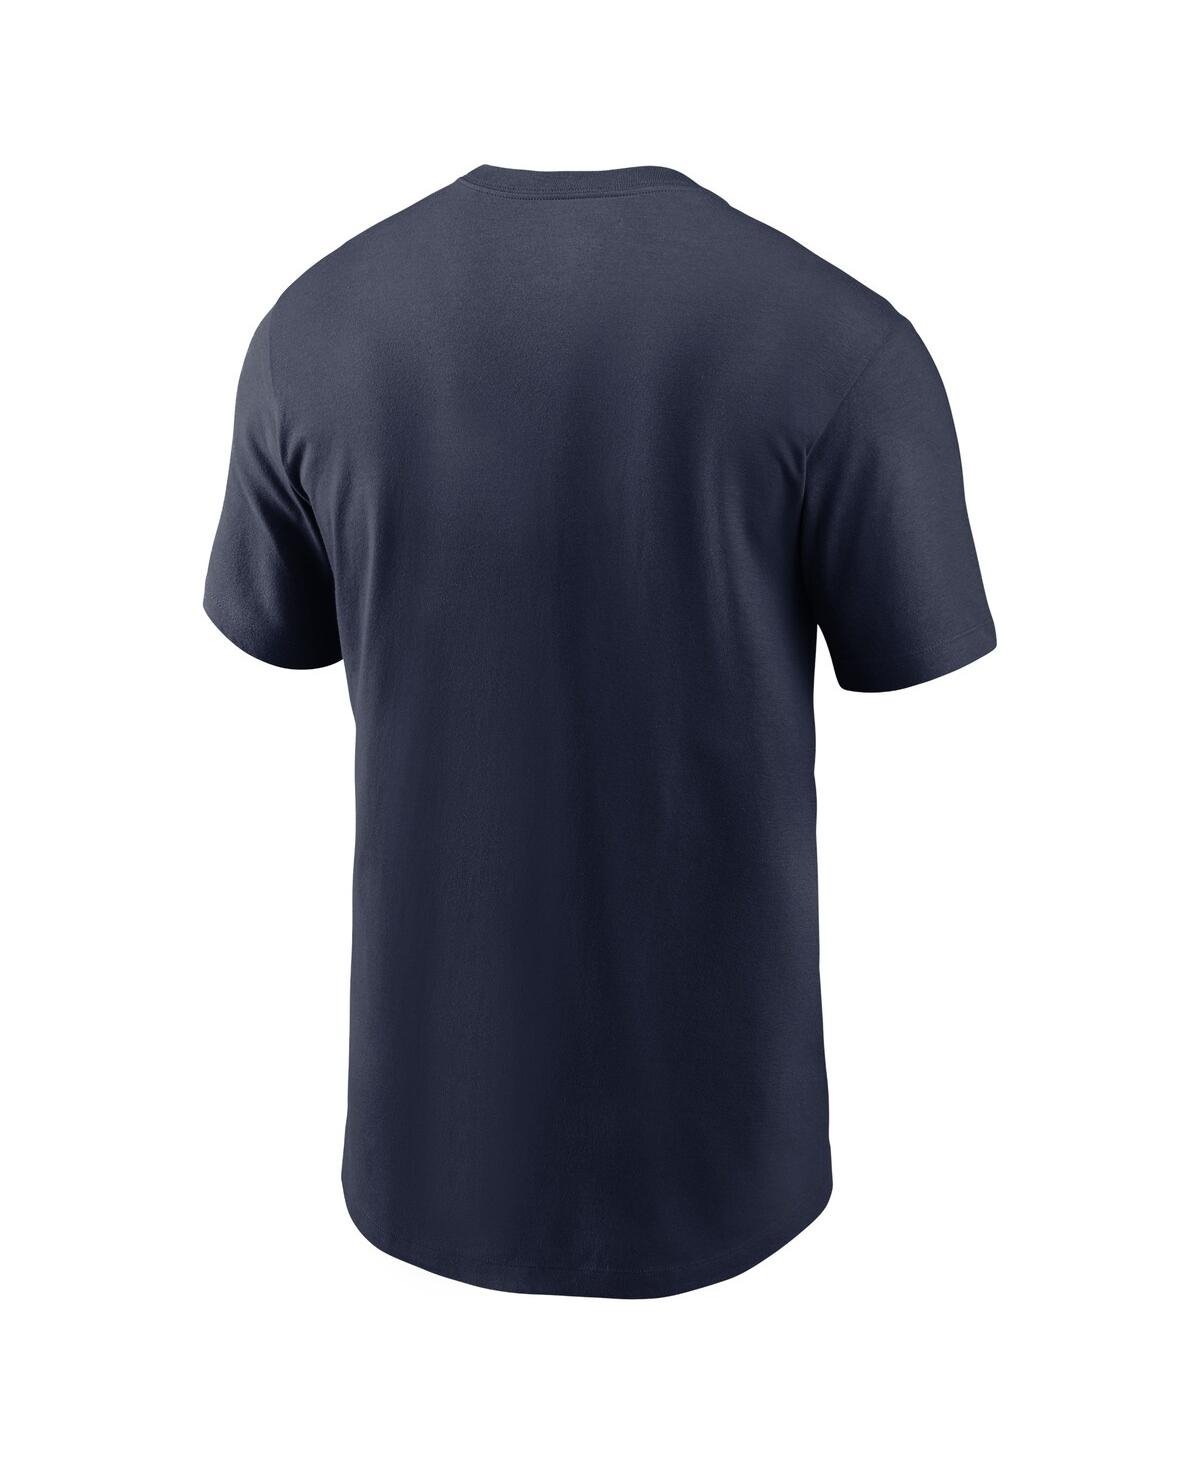 Shop Nike Men's  College Navy Seattle Seahawks Division Essential T-shirt